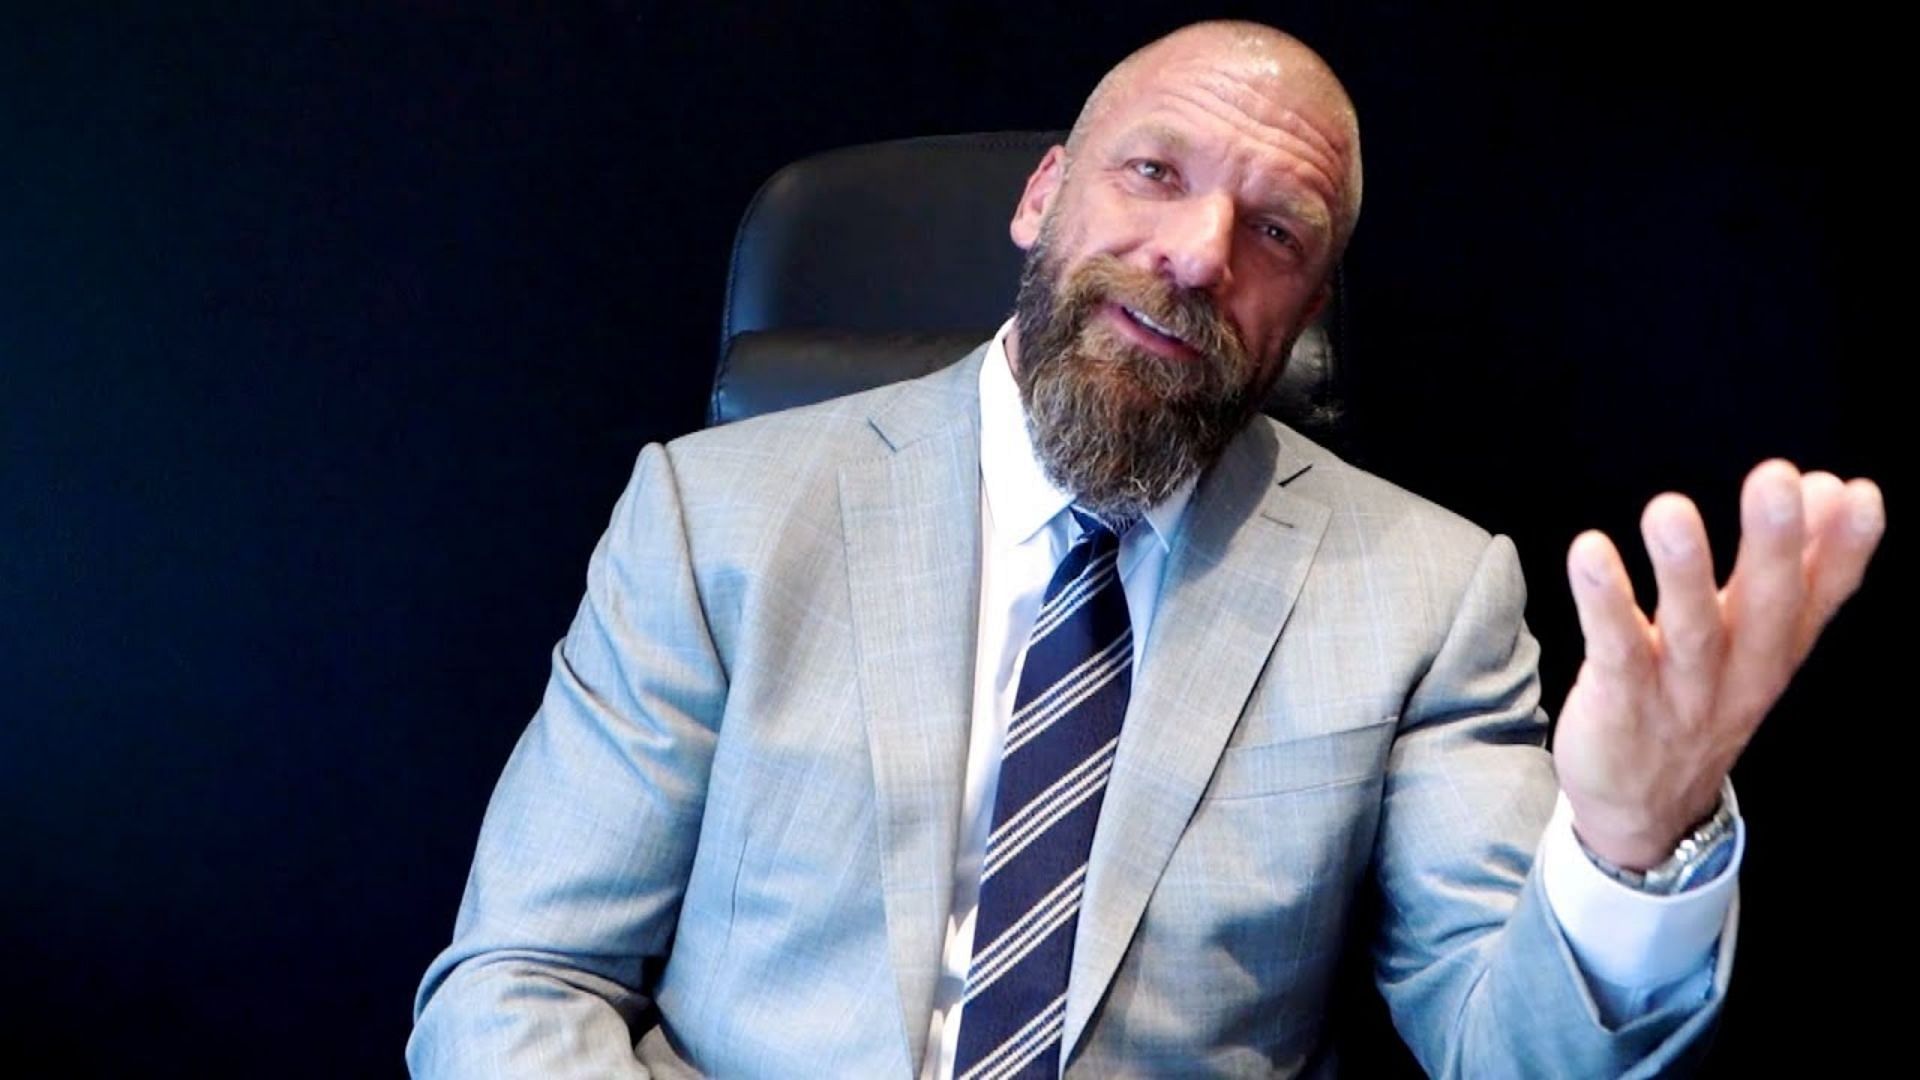 Triple H replaced Vince McMahon as WWE